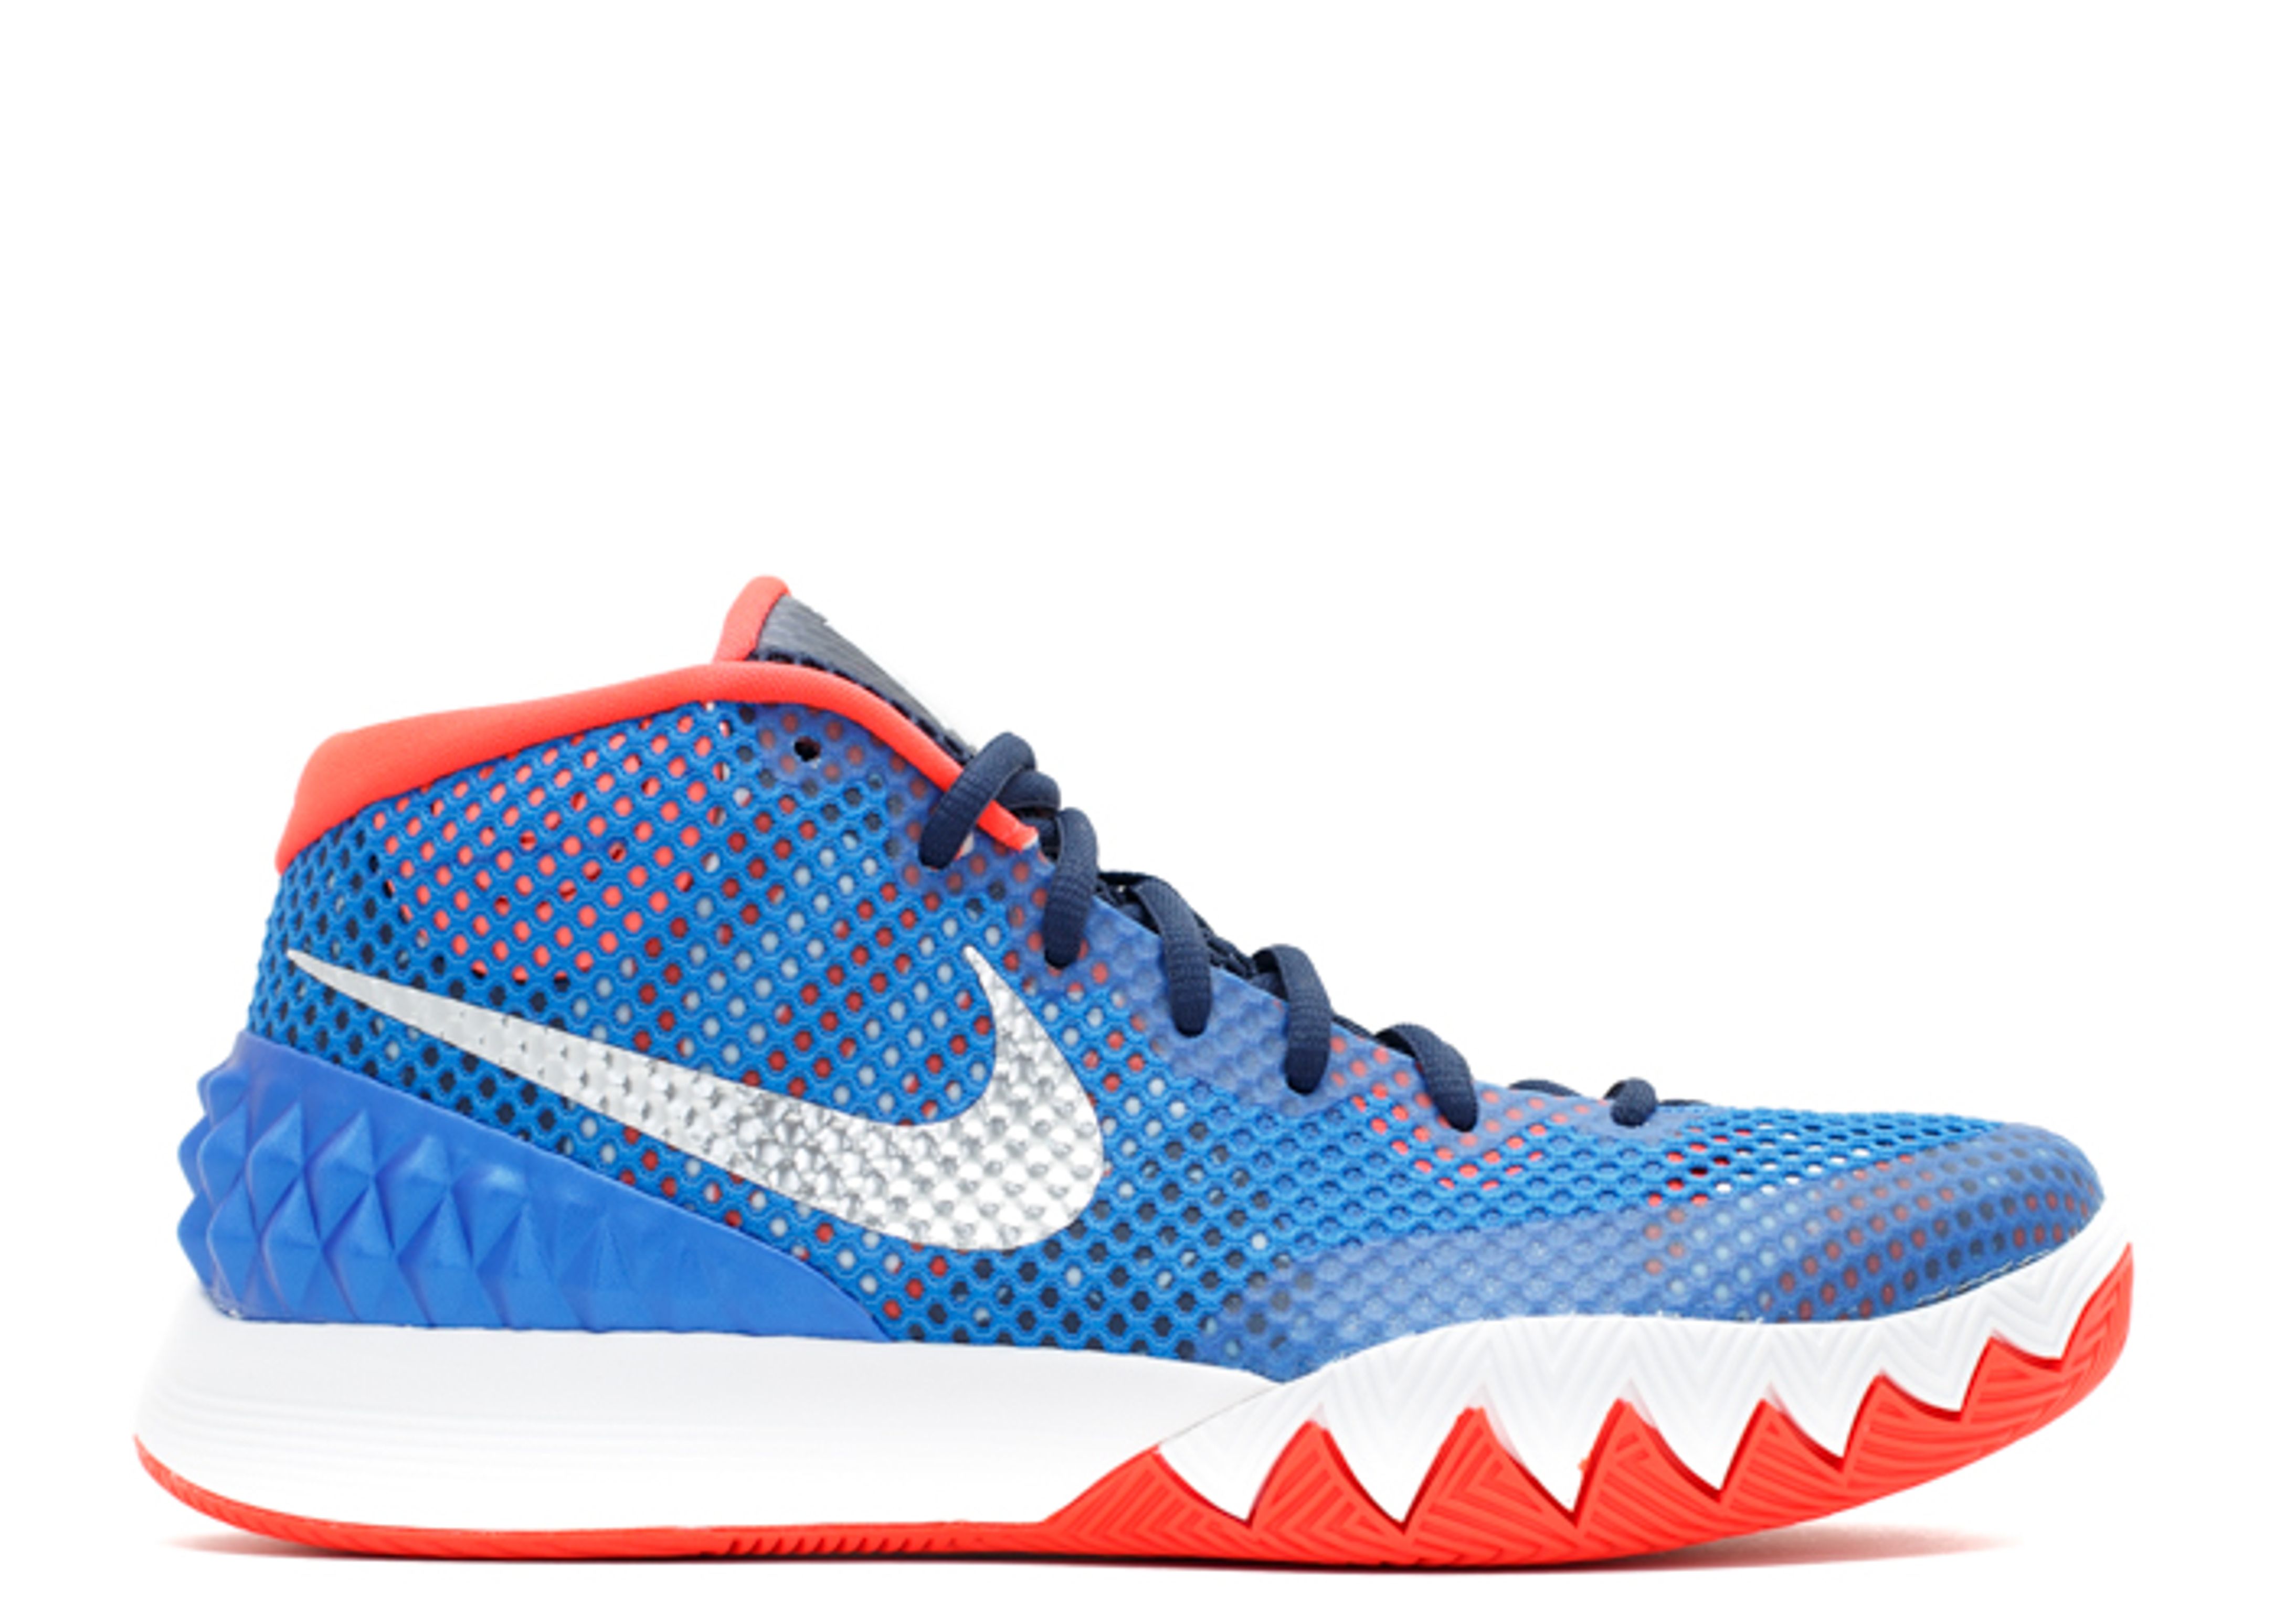 kyrie 1 white and blue